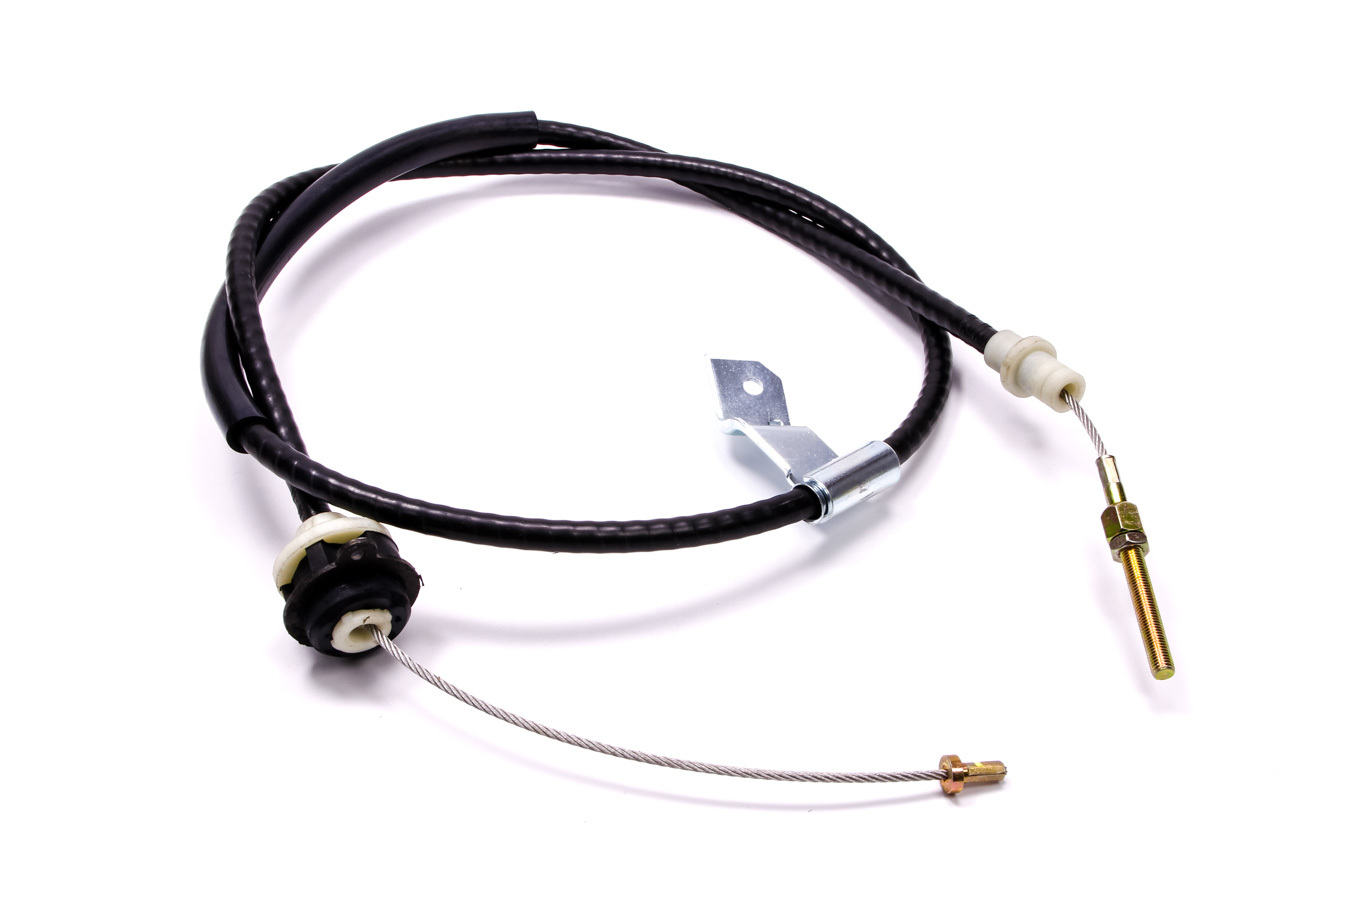 FORD Clutch Cable, Adjustable, Ford Motorsport Quadrant Kit, Ford Mustang 1996-2004, Each